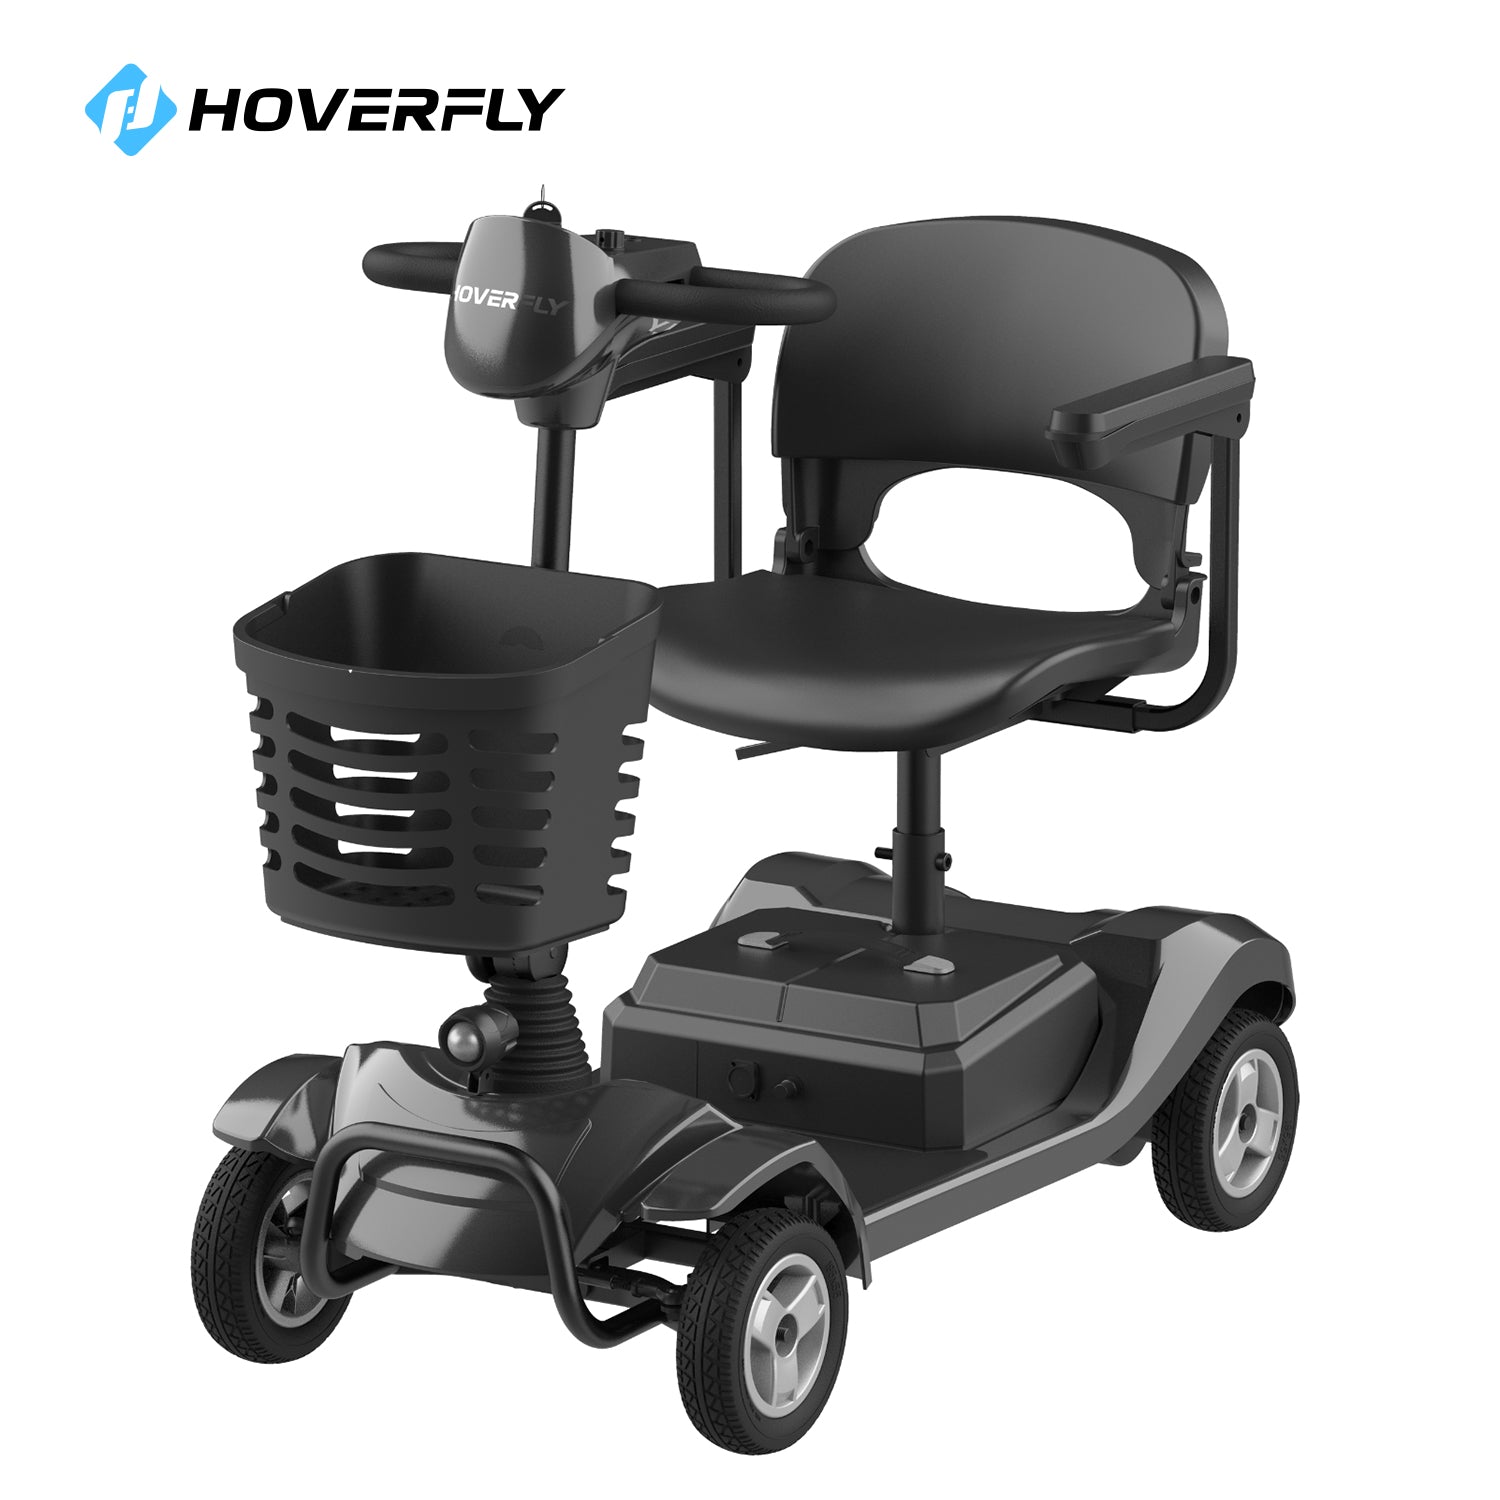 Classic Black Hoverfly T4 Electric Mobility Scooter, Front Perspective Showcasing Sophisticated Look and User-Friendly Controls.